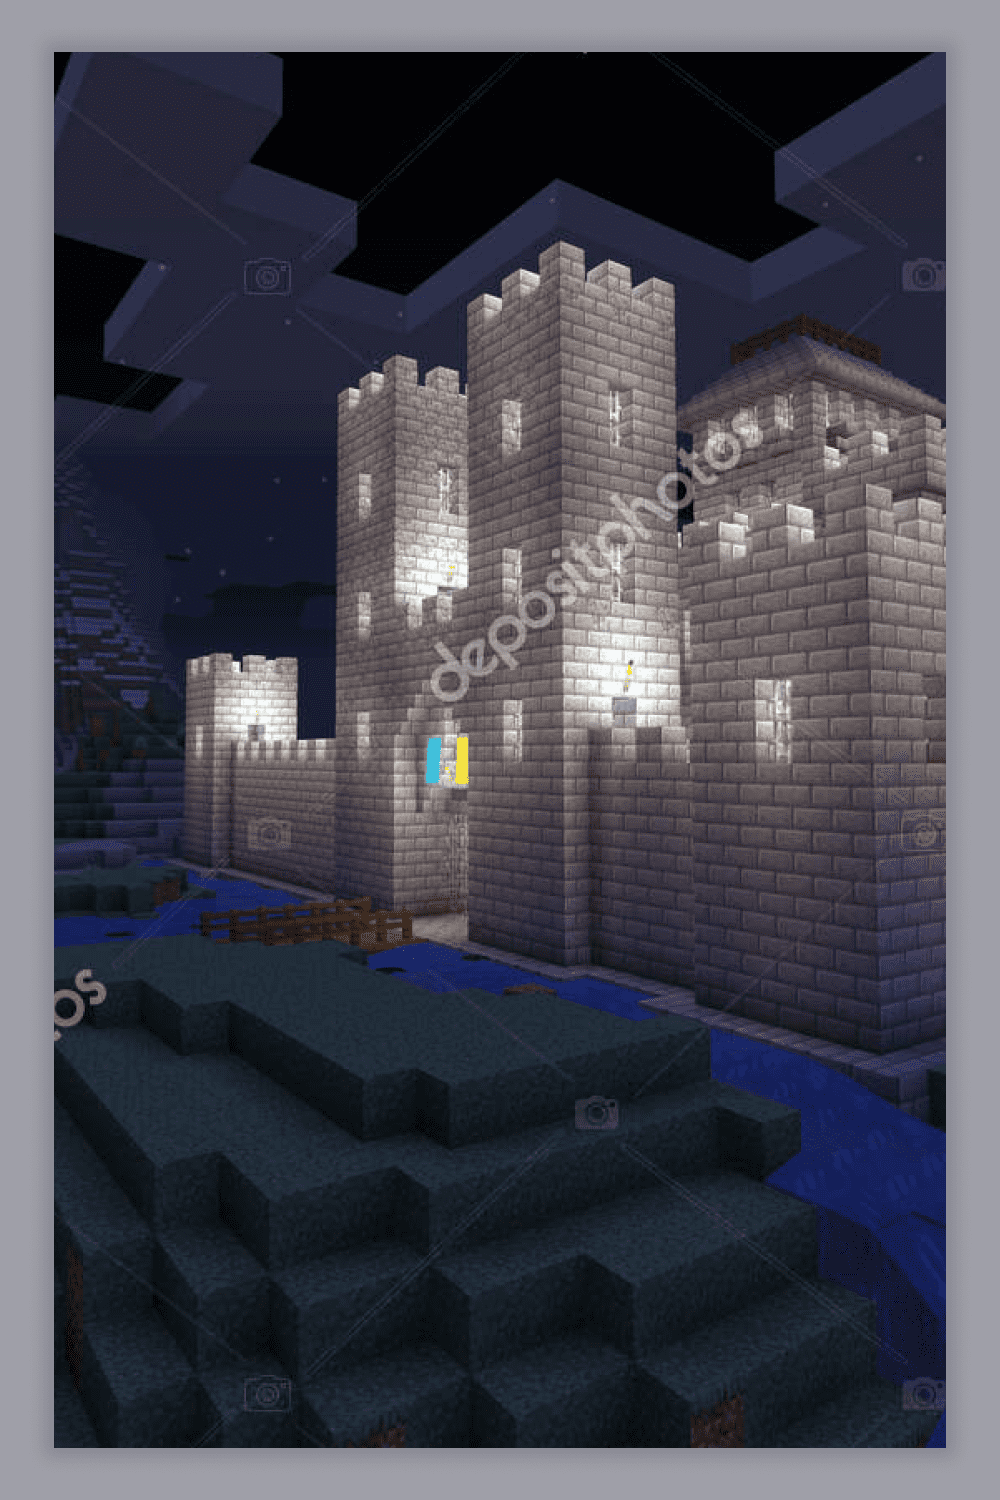 8 simply stone castle minecraft game 3d 398